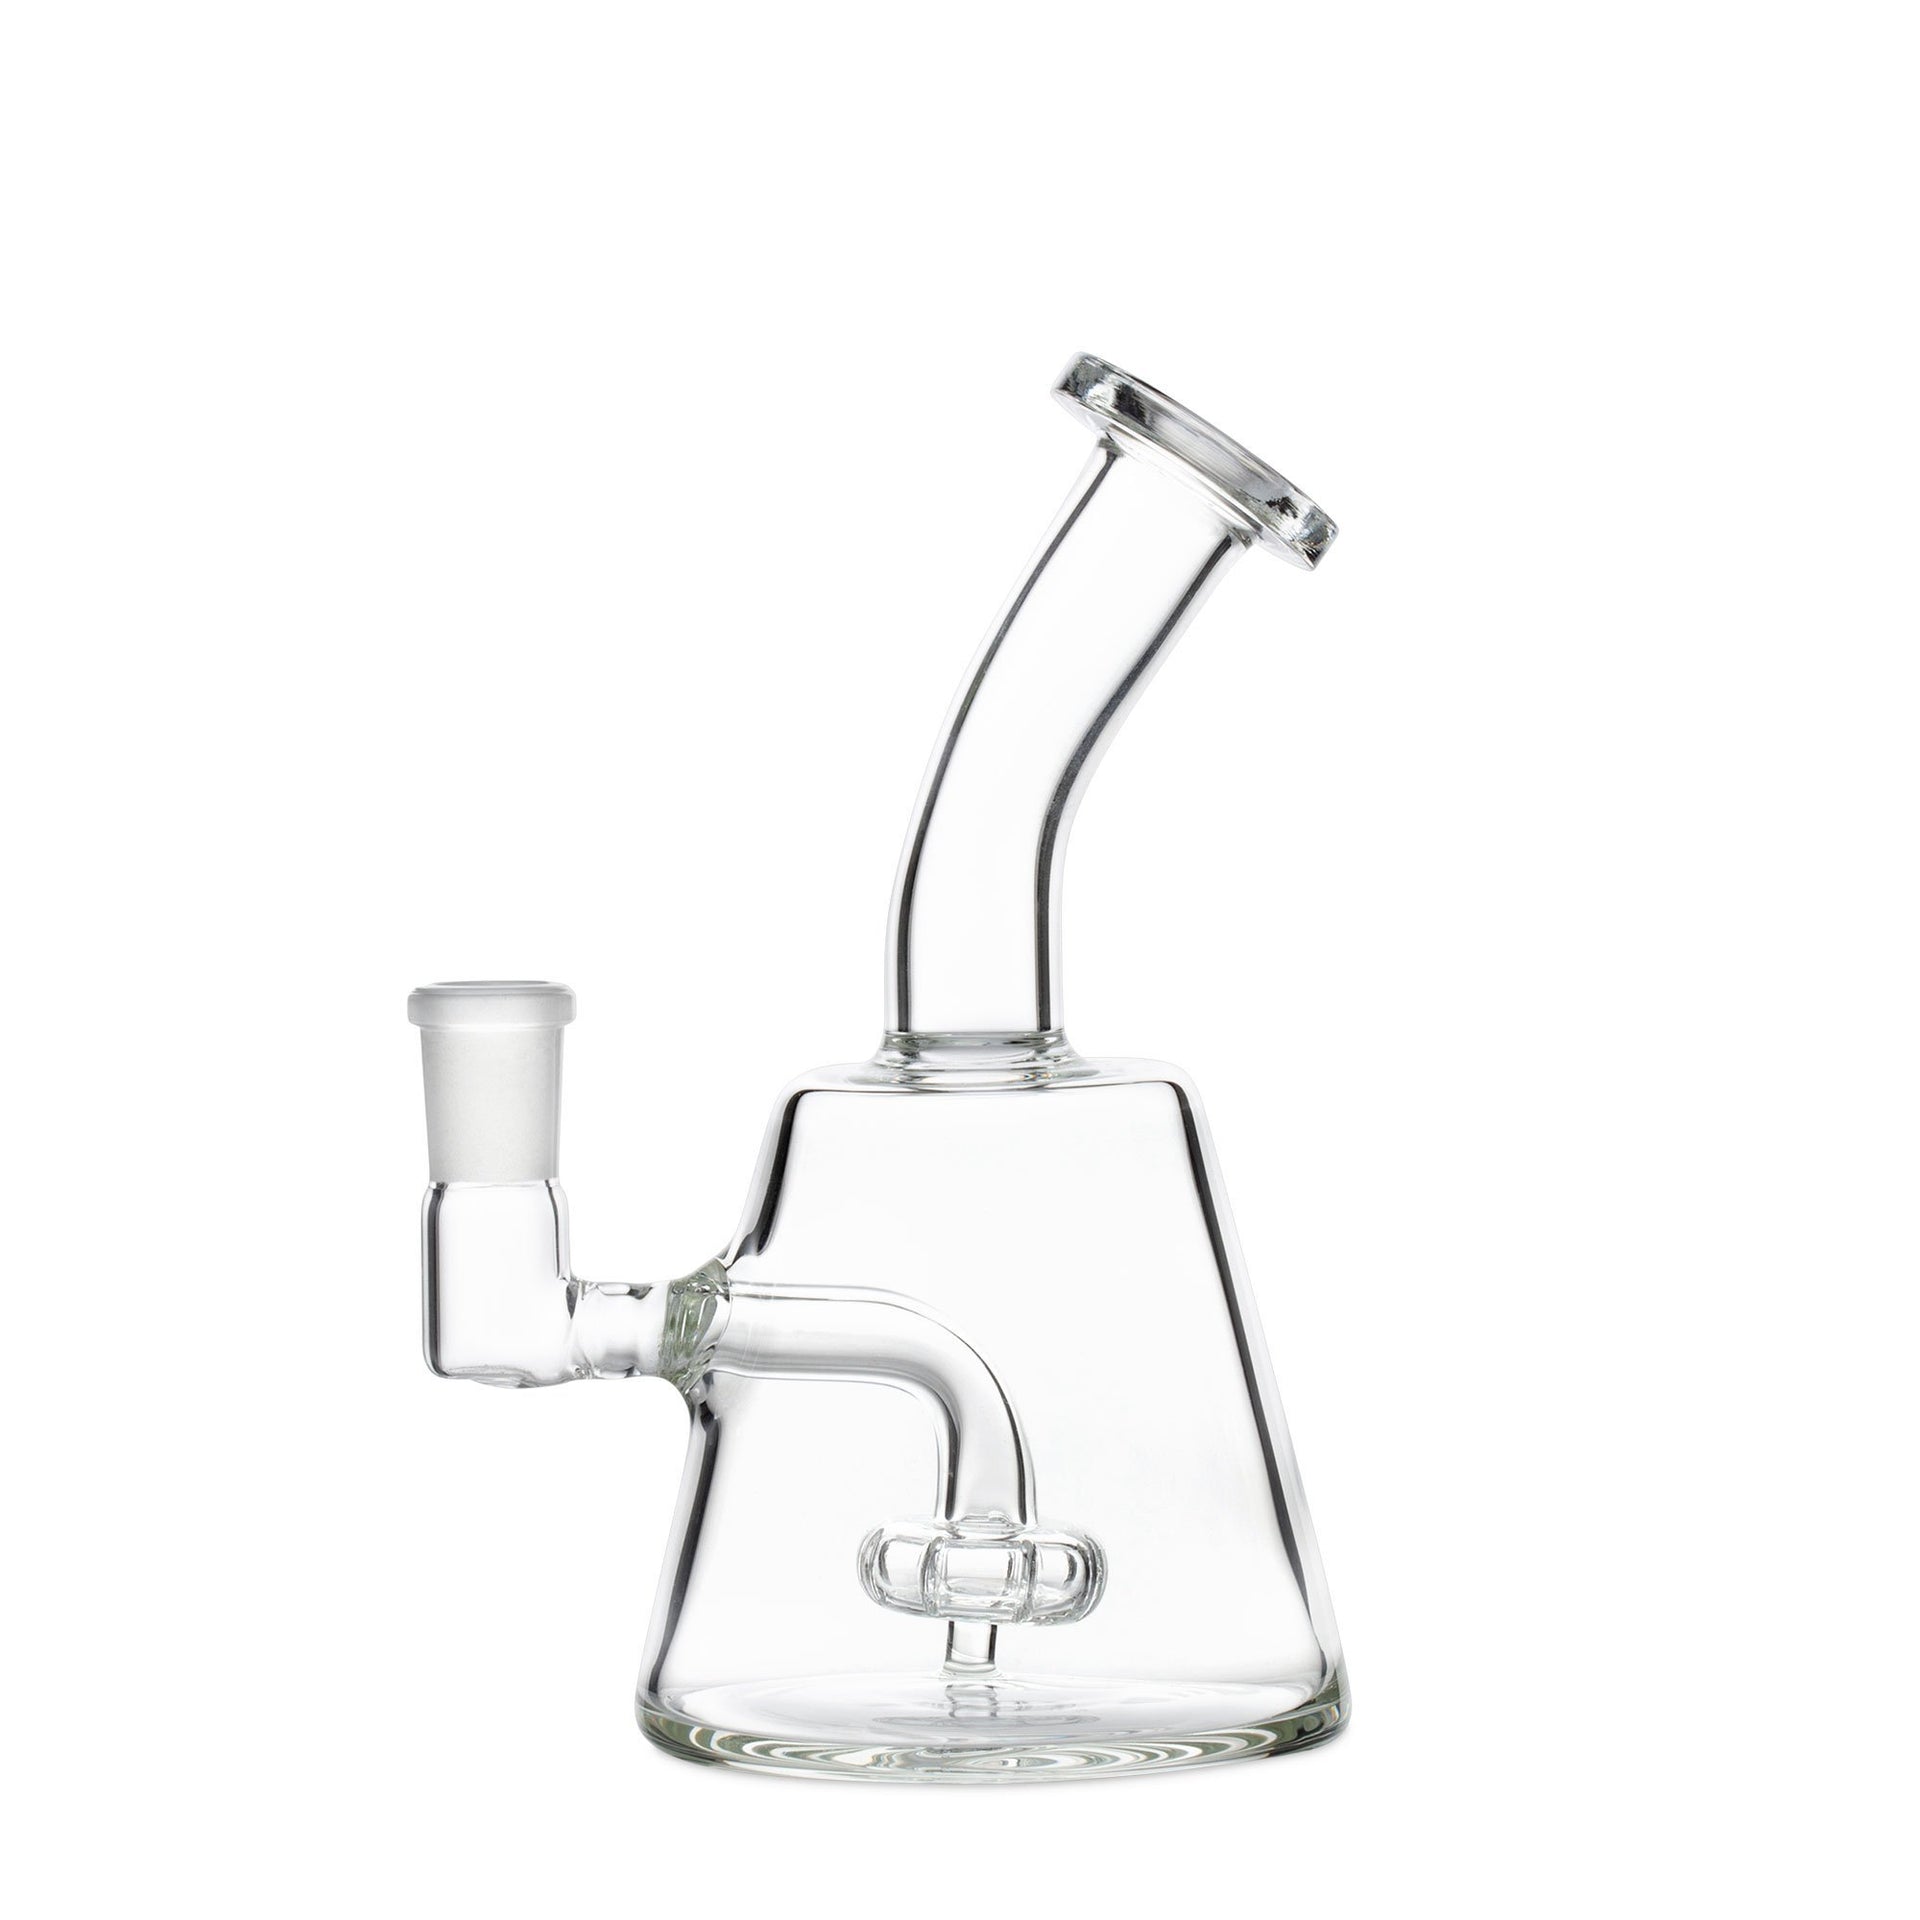 Bent Neck Dab Rig / $ 69.99 at 420 Science